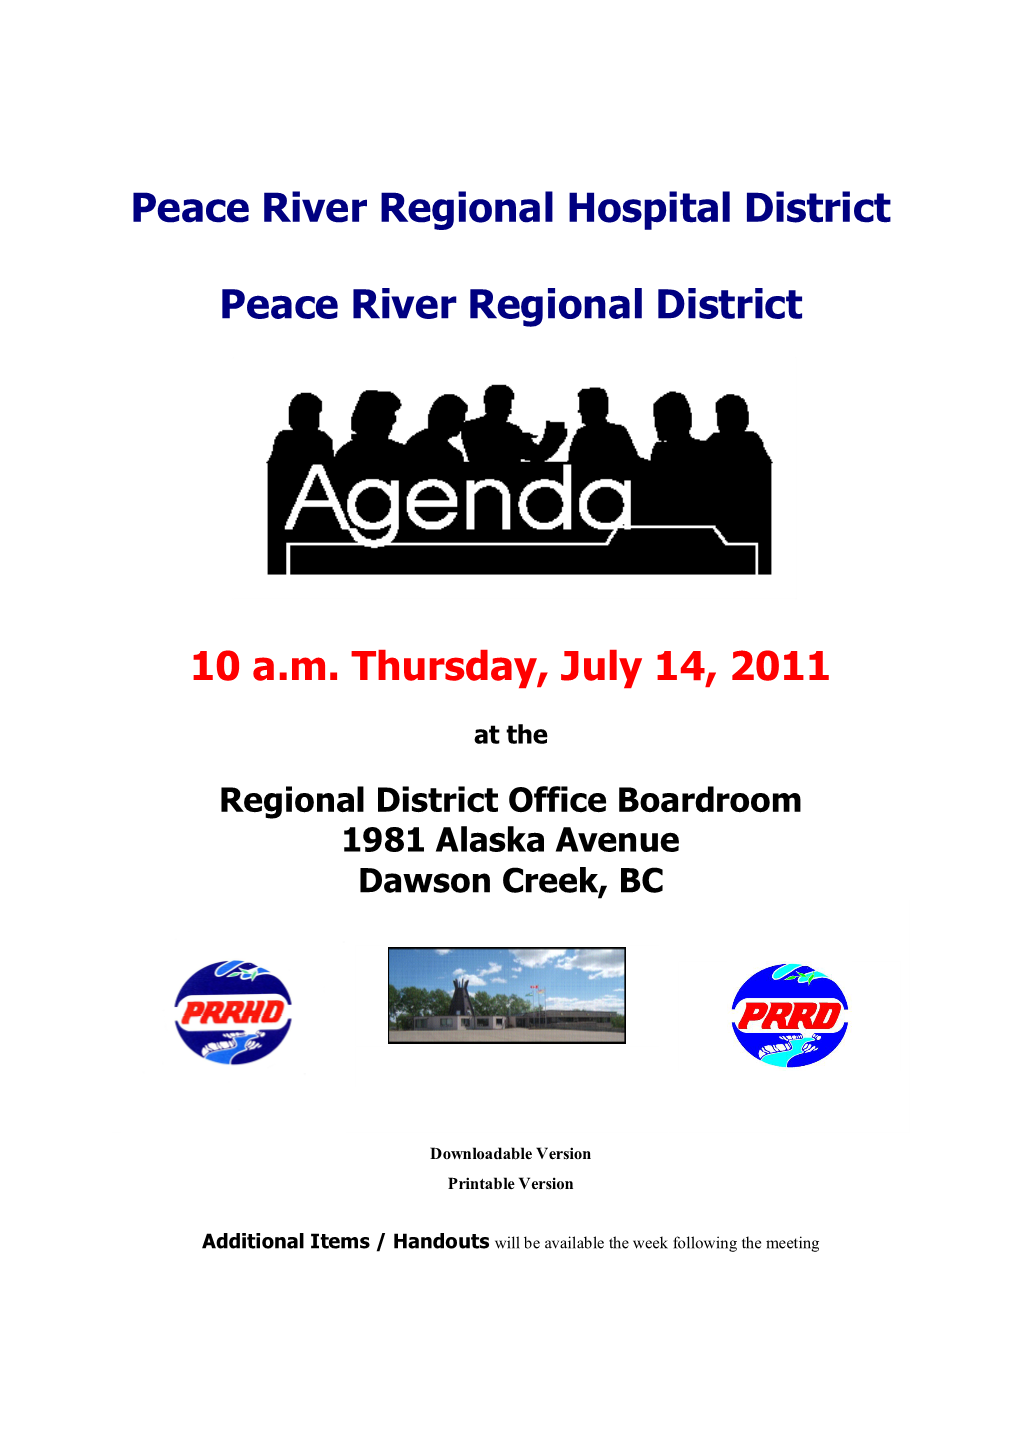 Peace River Regional District 2011 Schedule of Events